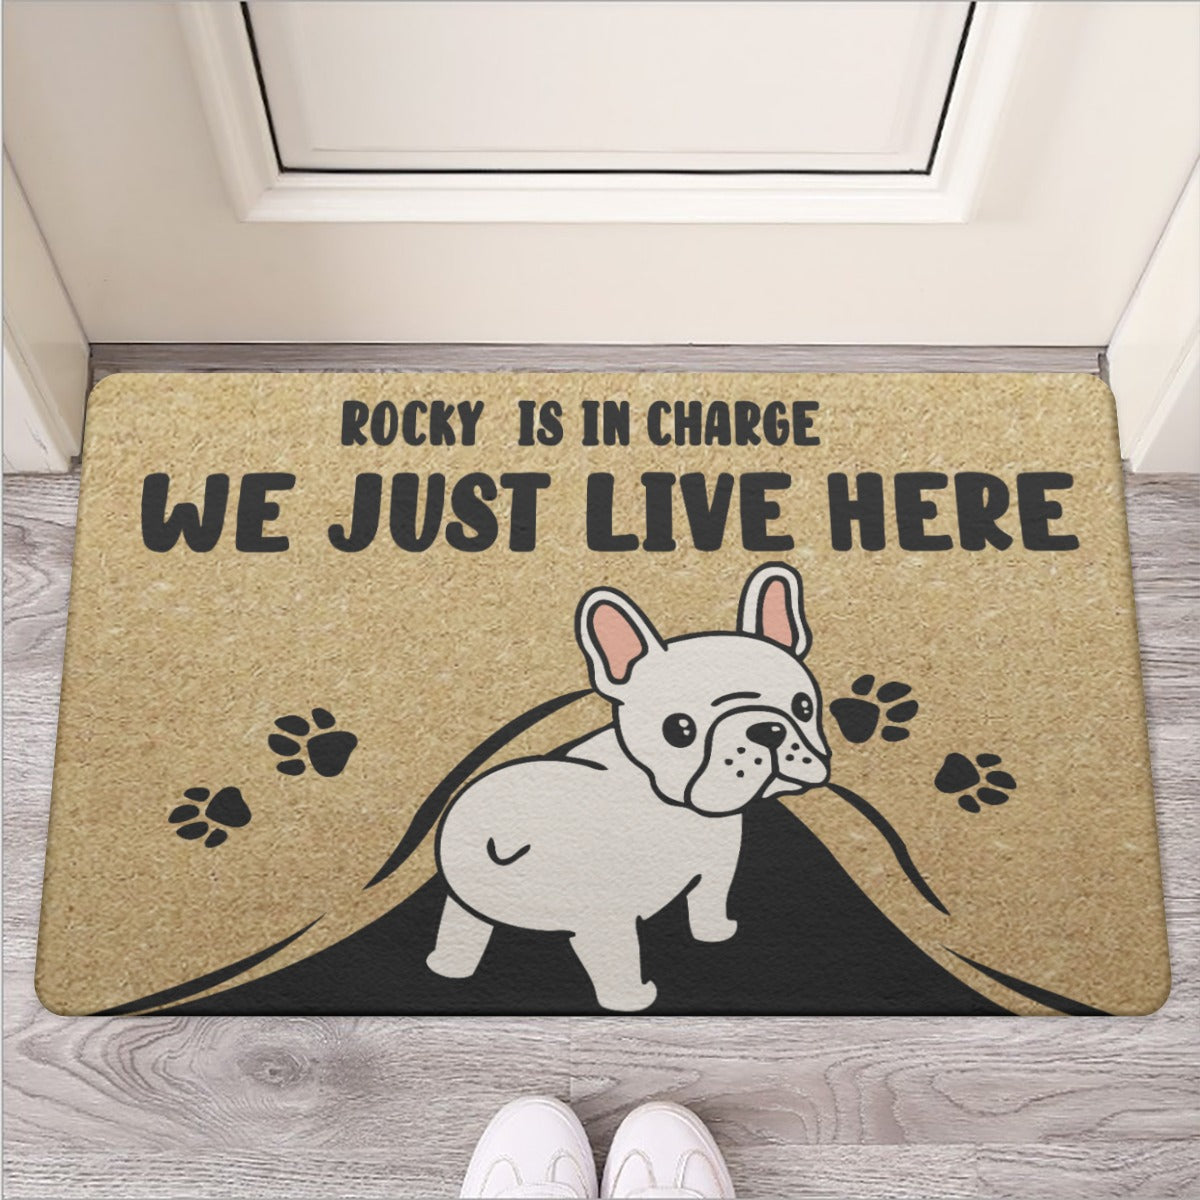 My Frenchie is in charge - Door Mat